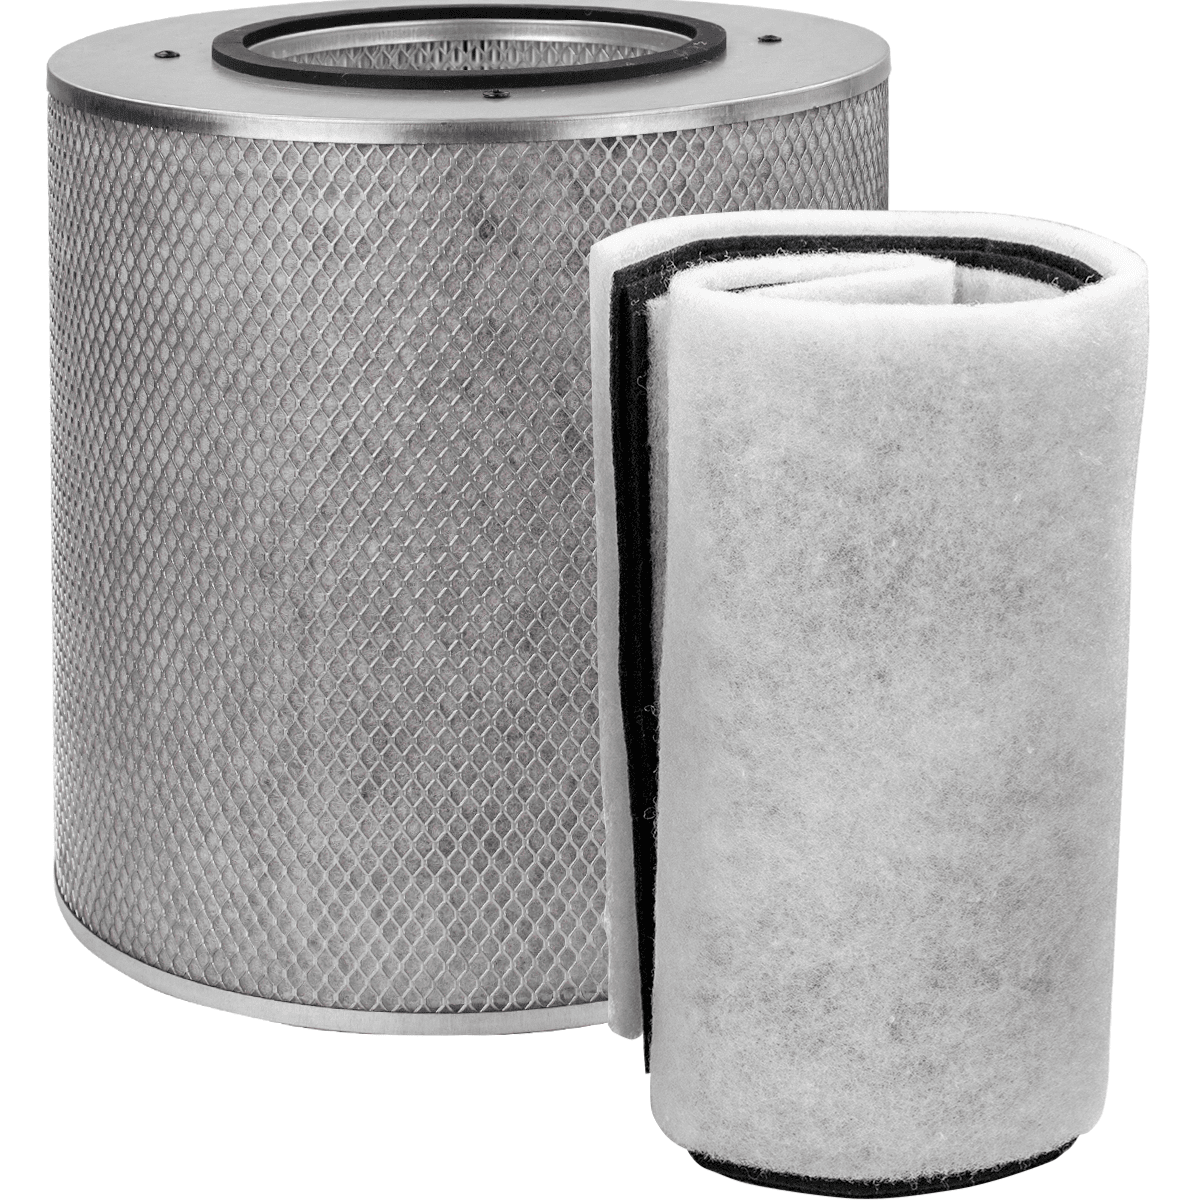 Filter-Monster Replacement Filter Compatible With Austin Air Healthmate Jr. PLUS (FR250)